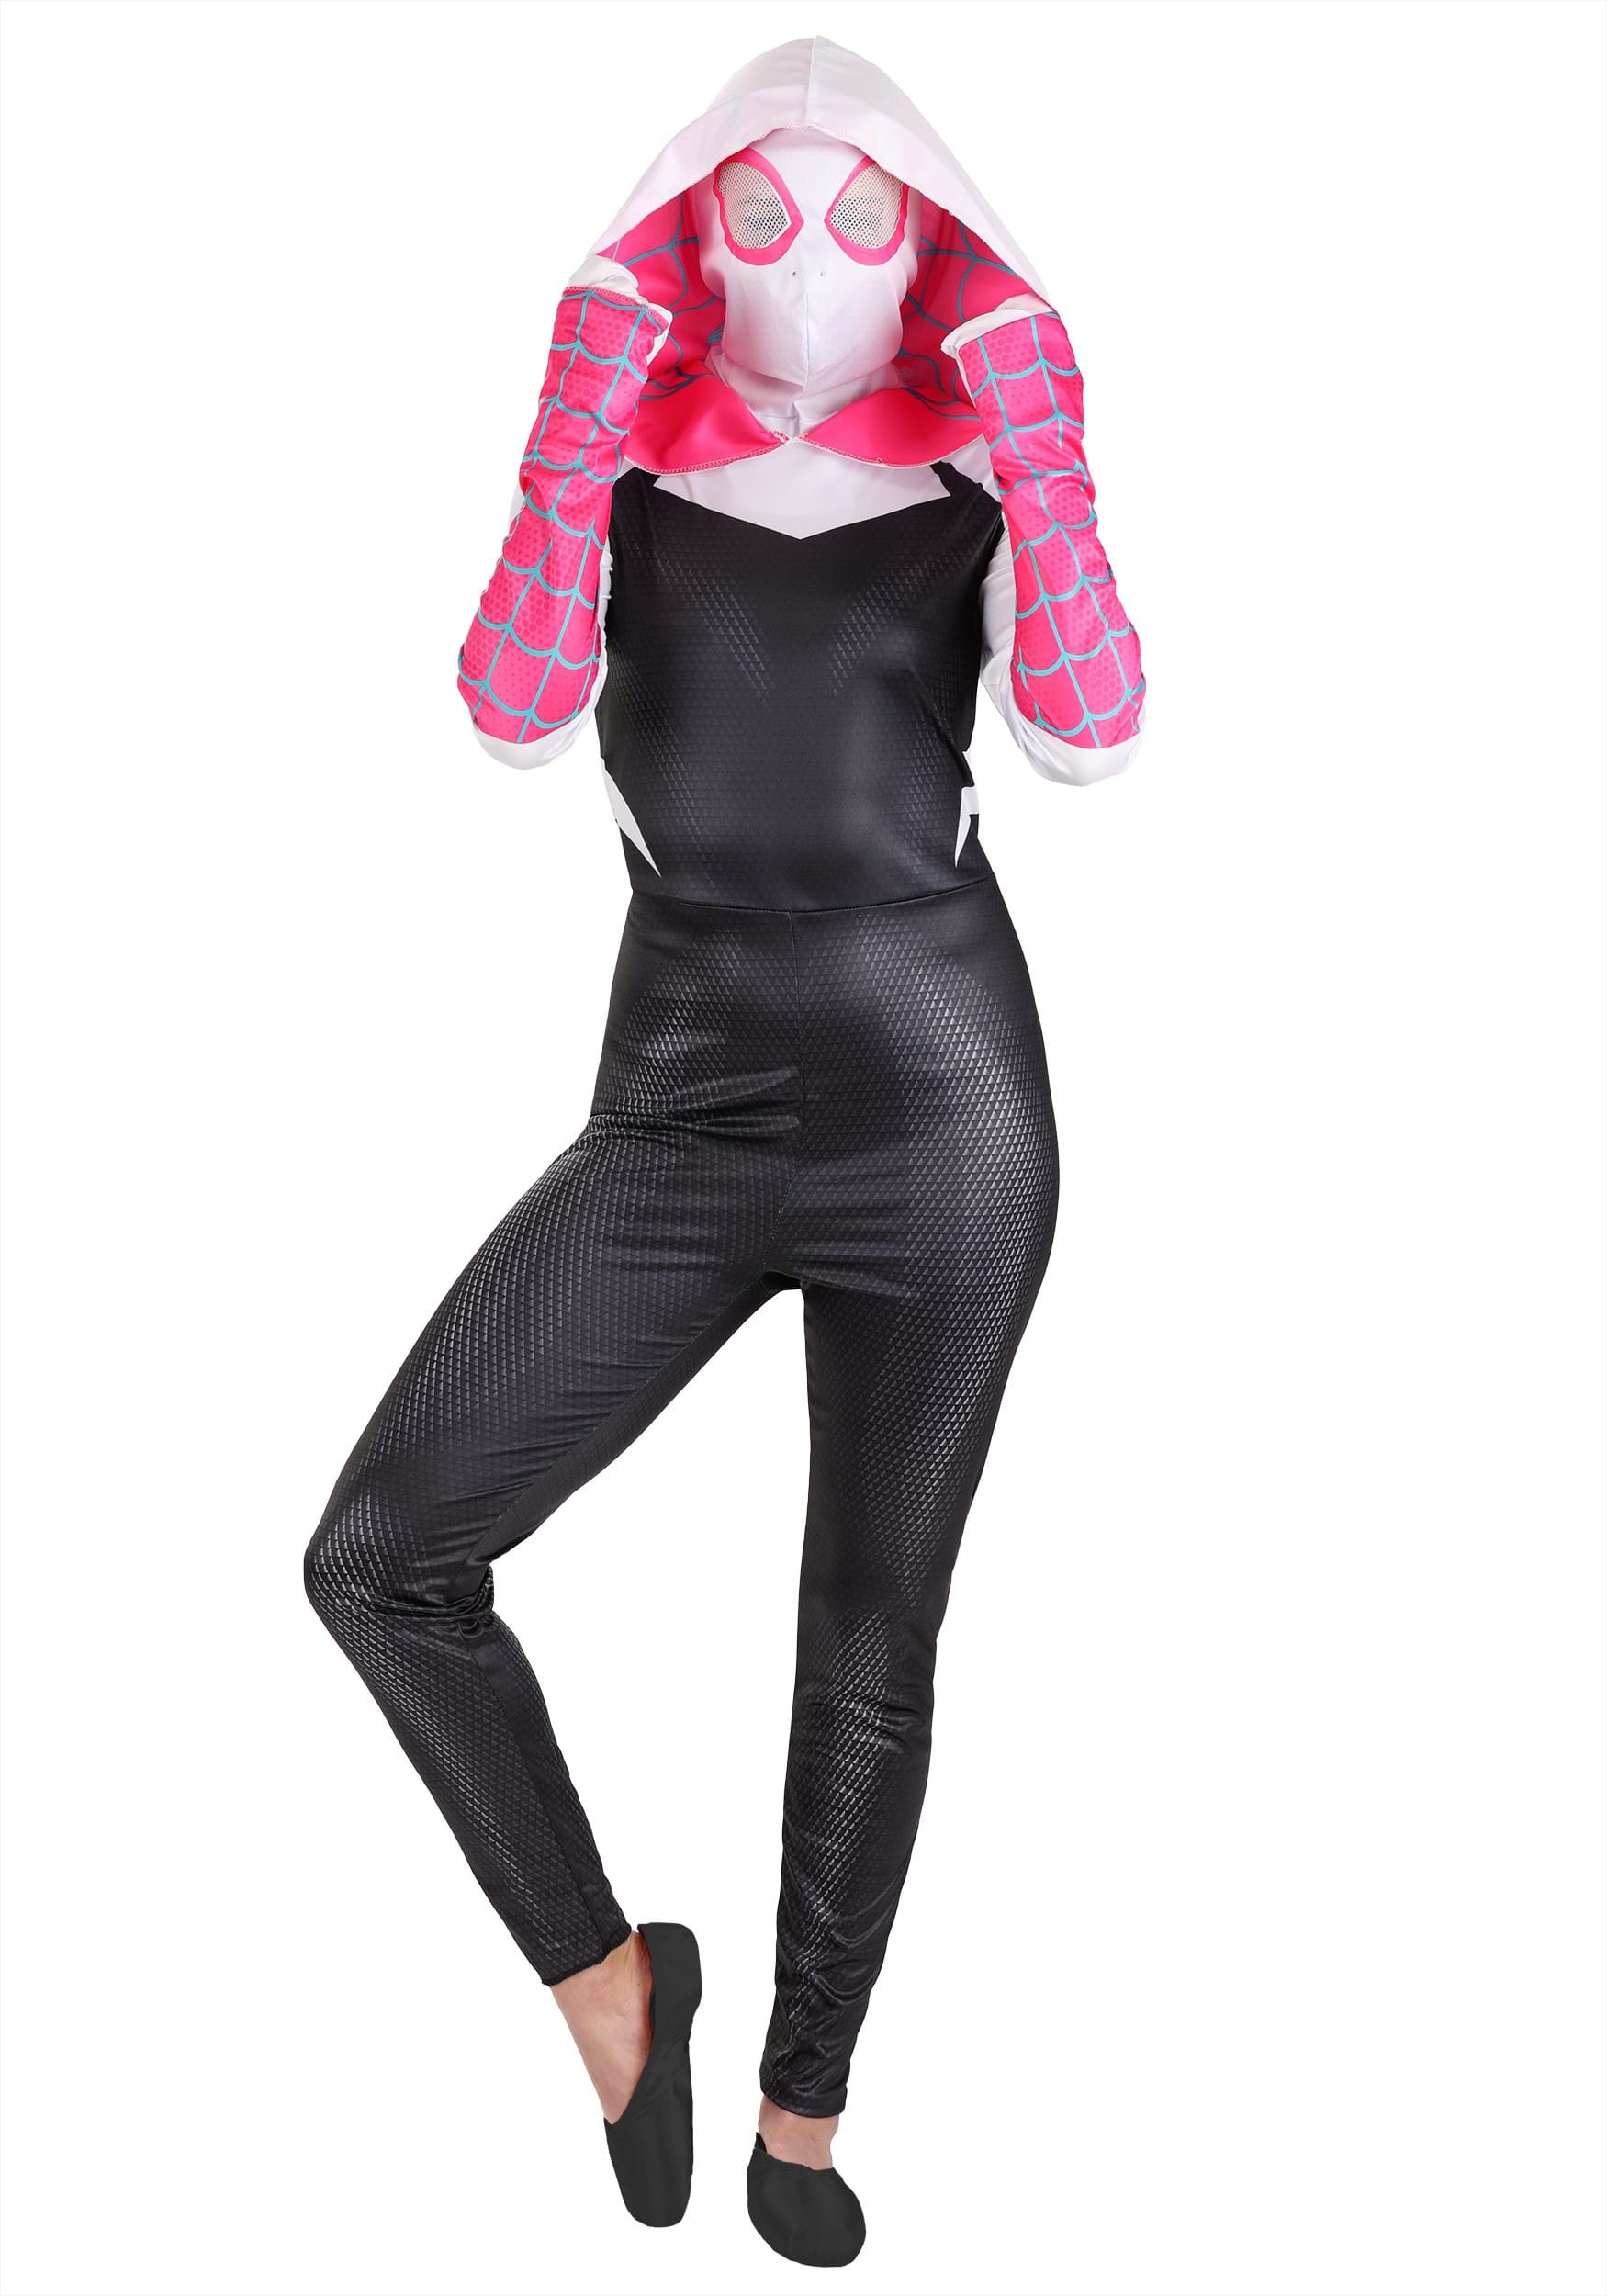 Spider-Gwen Costume For Adults